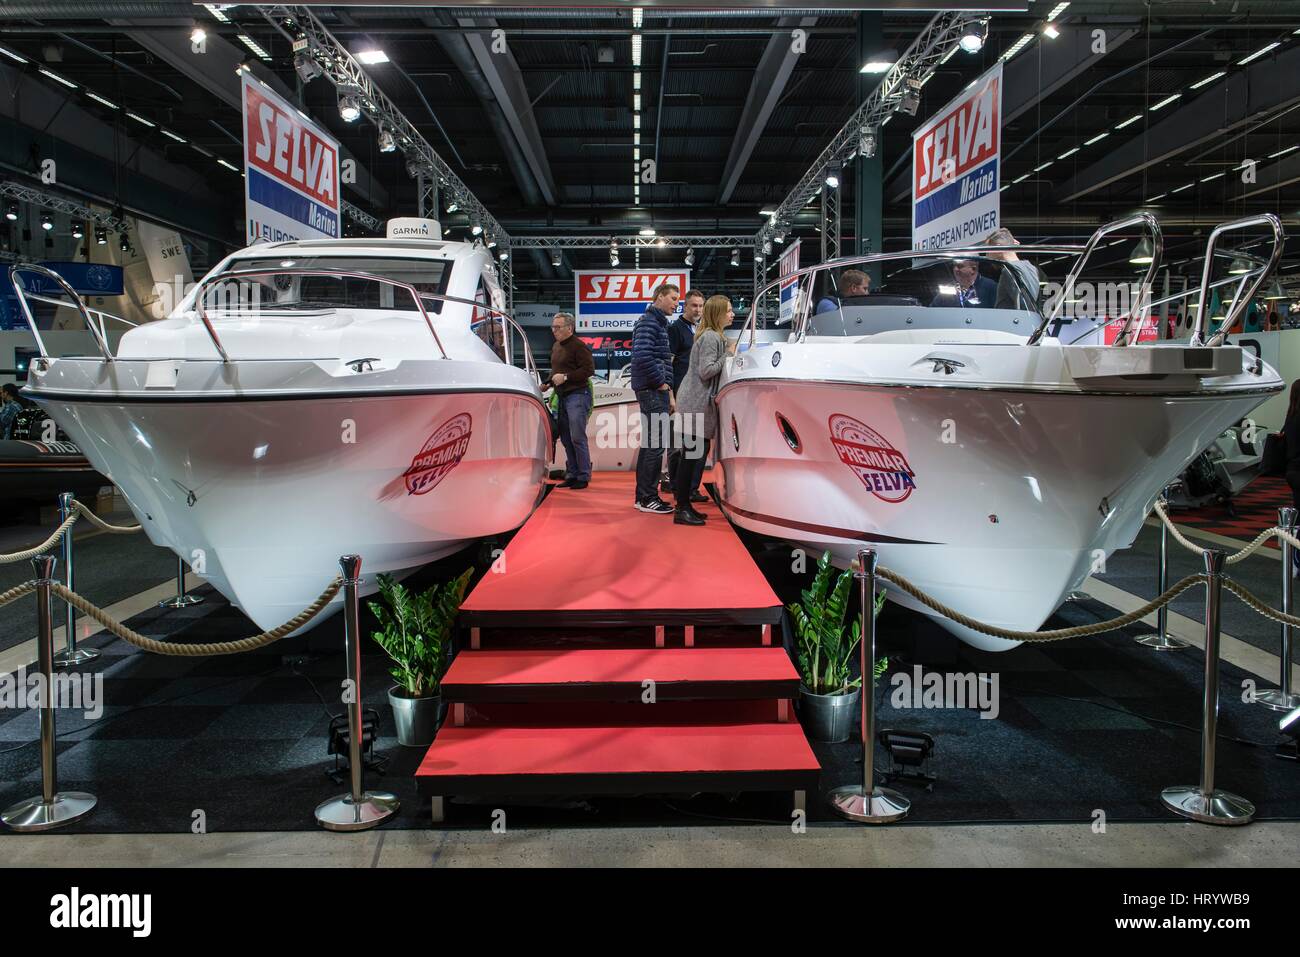 Stockholm, Sweden. 5th Mar, 2017. People visit 2017 Stockholm Boat Show, the largest exhibition in Sweden showcasing new boats and accessories, in Stockholm, capital of Sweden, March 5, 2017. Credit: Shi Tiansheng/Xinhua/Alamy Live News Stock Photo